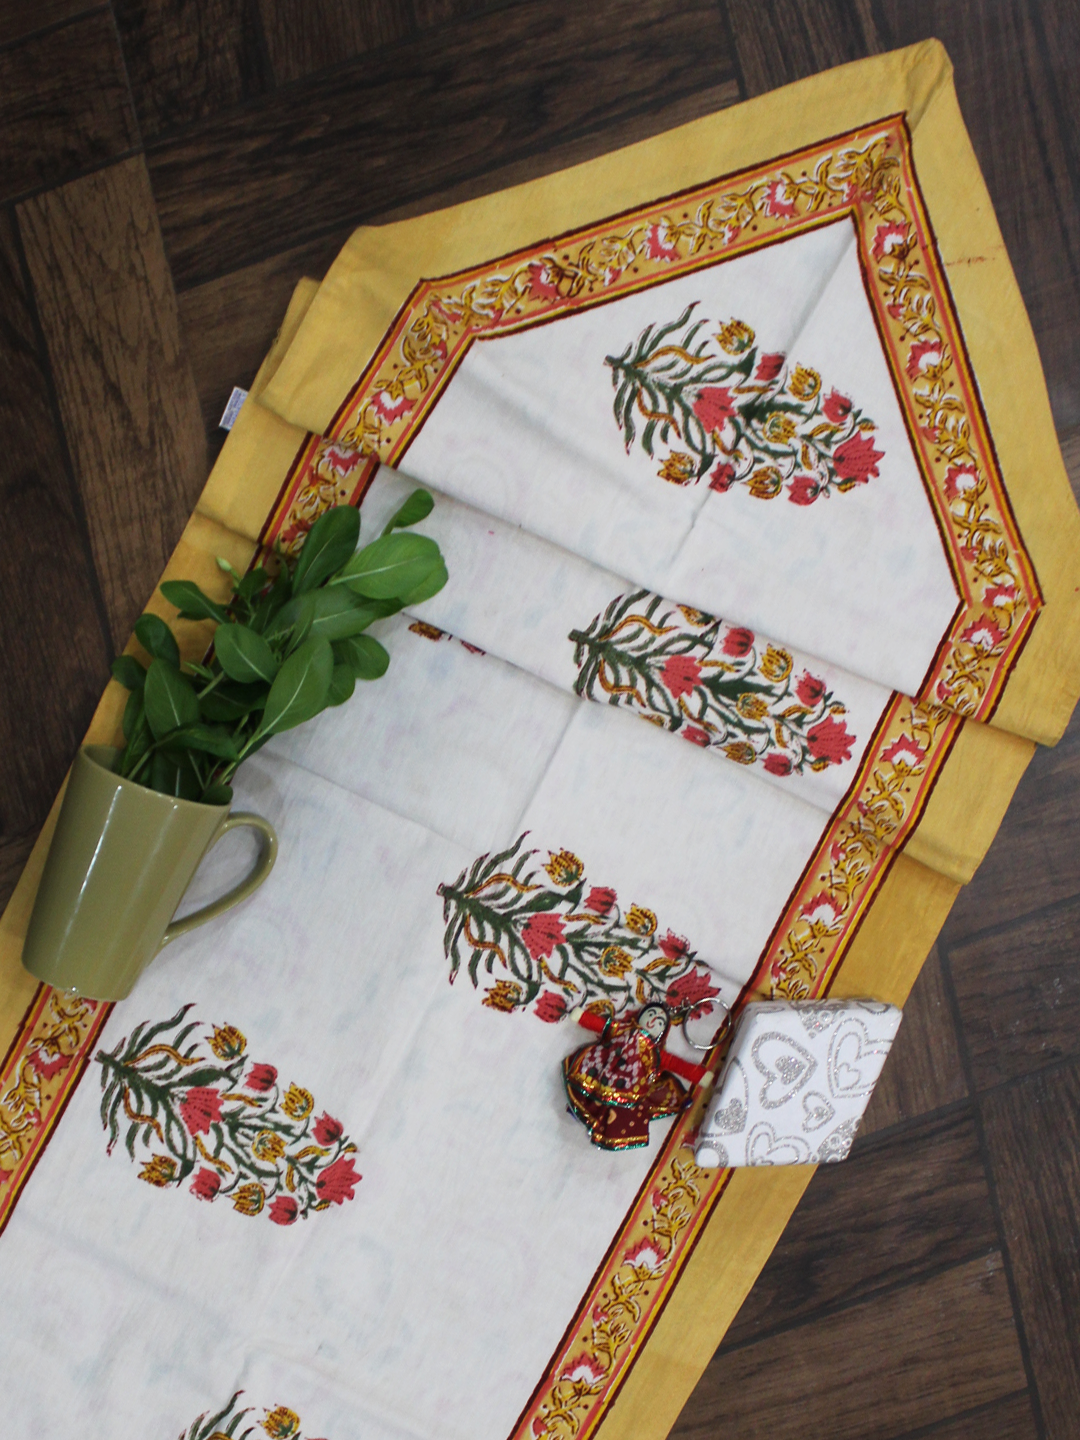 White and Yellow Floral Print Cotton Reversible Table Runner